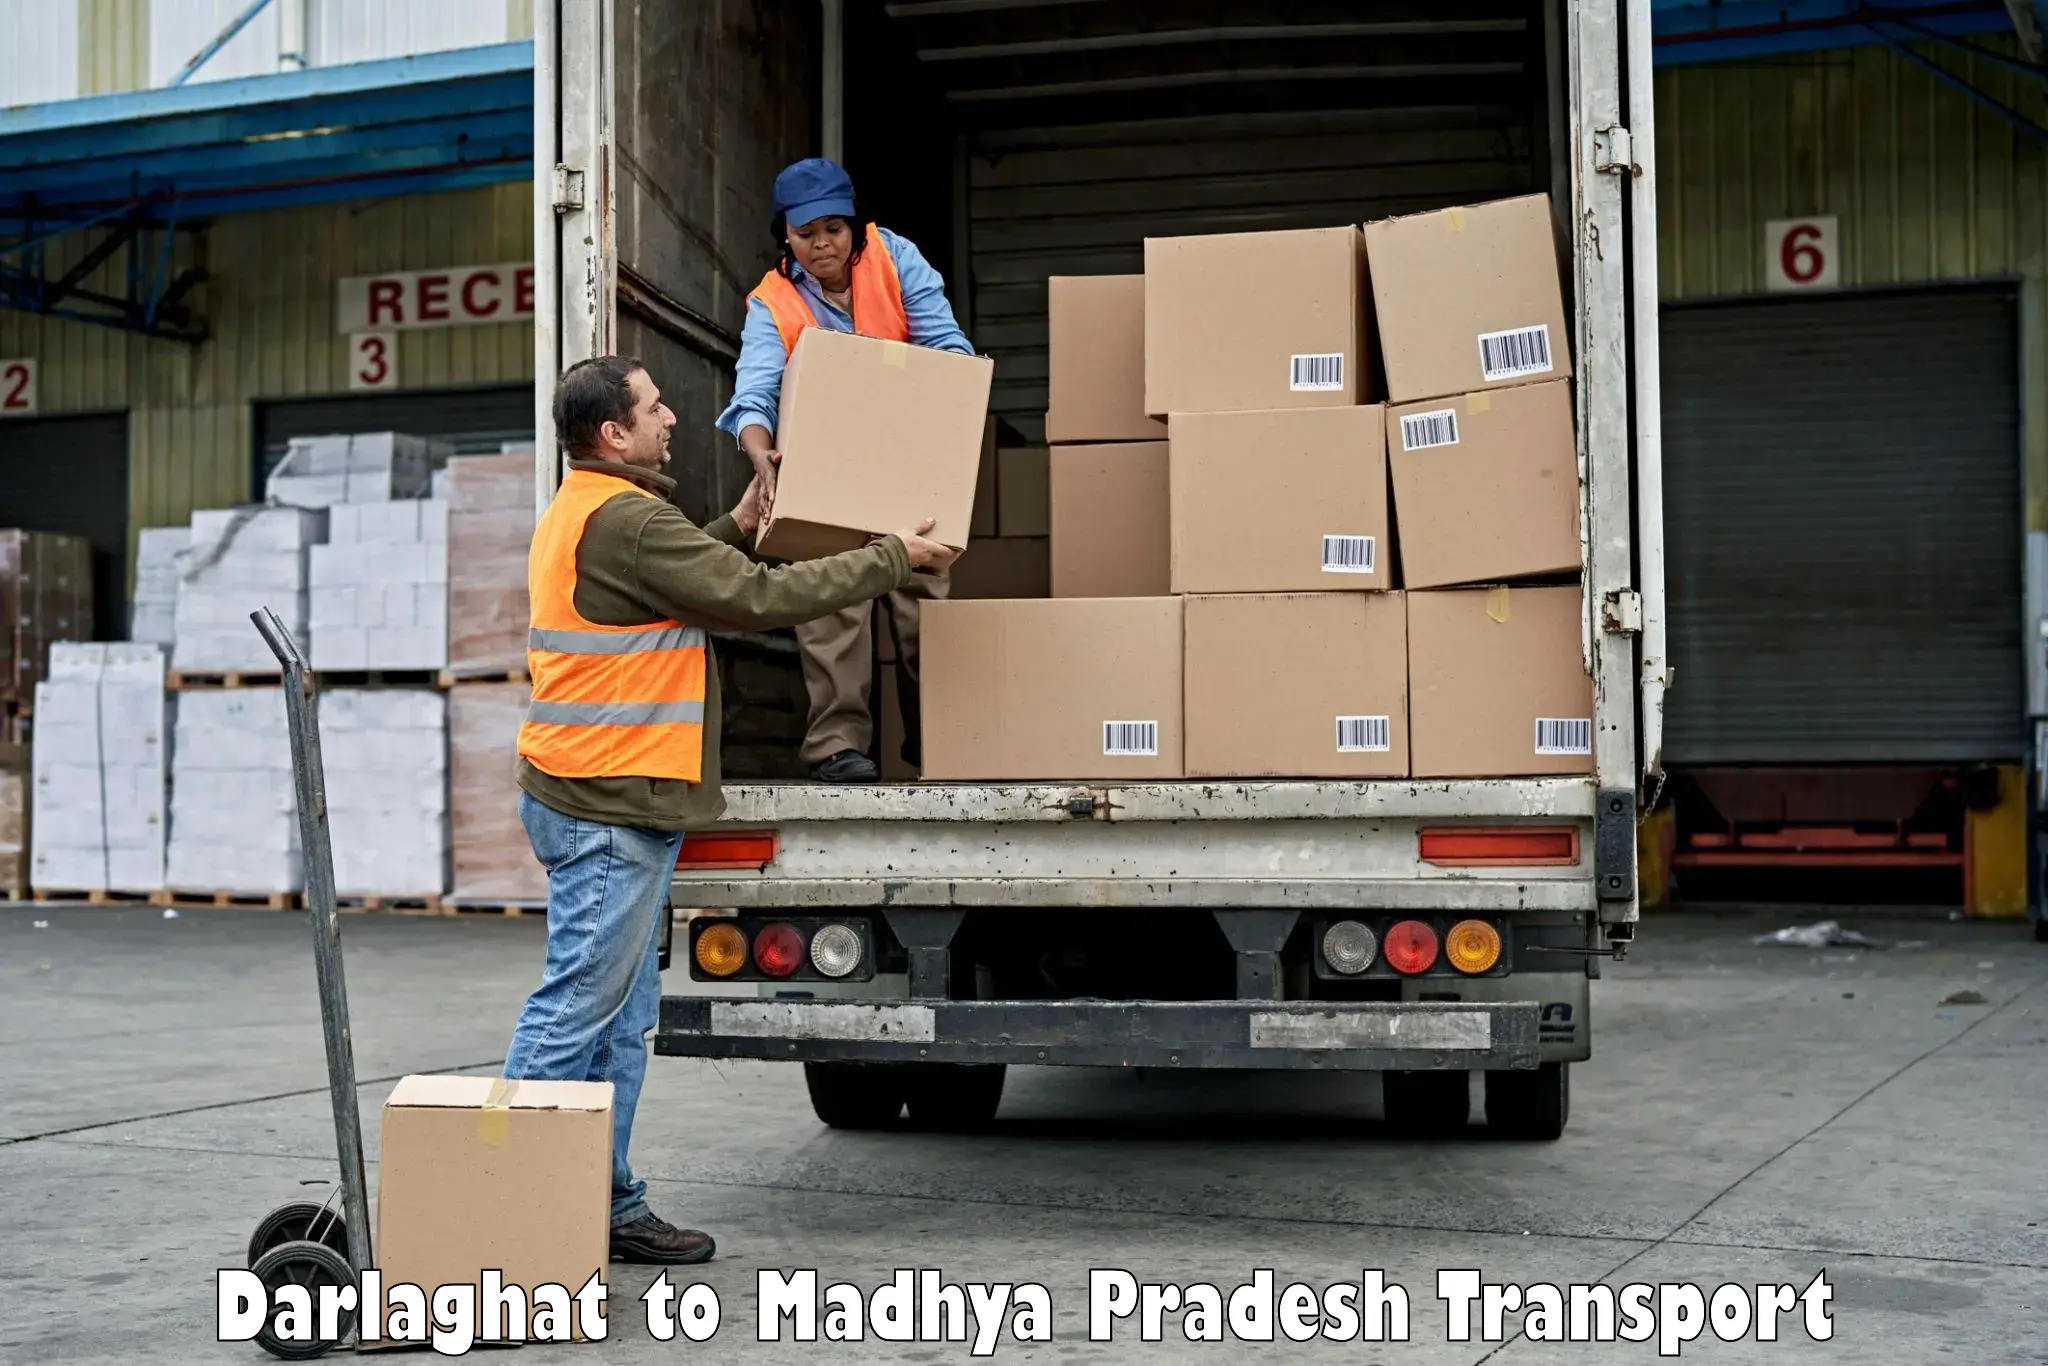 Express transport services Darlaghat to Dabra